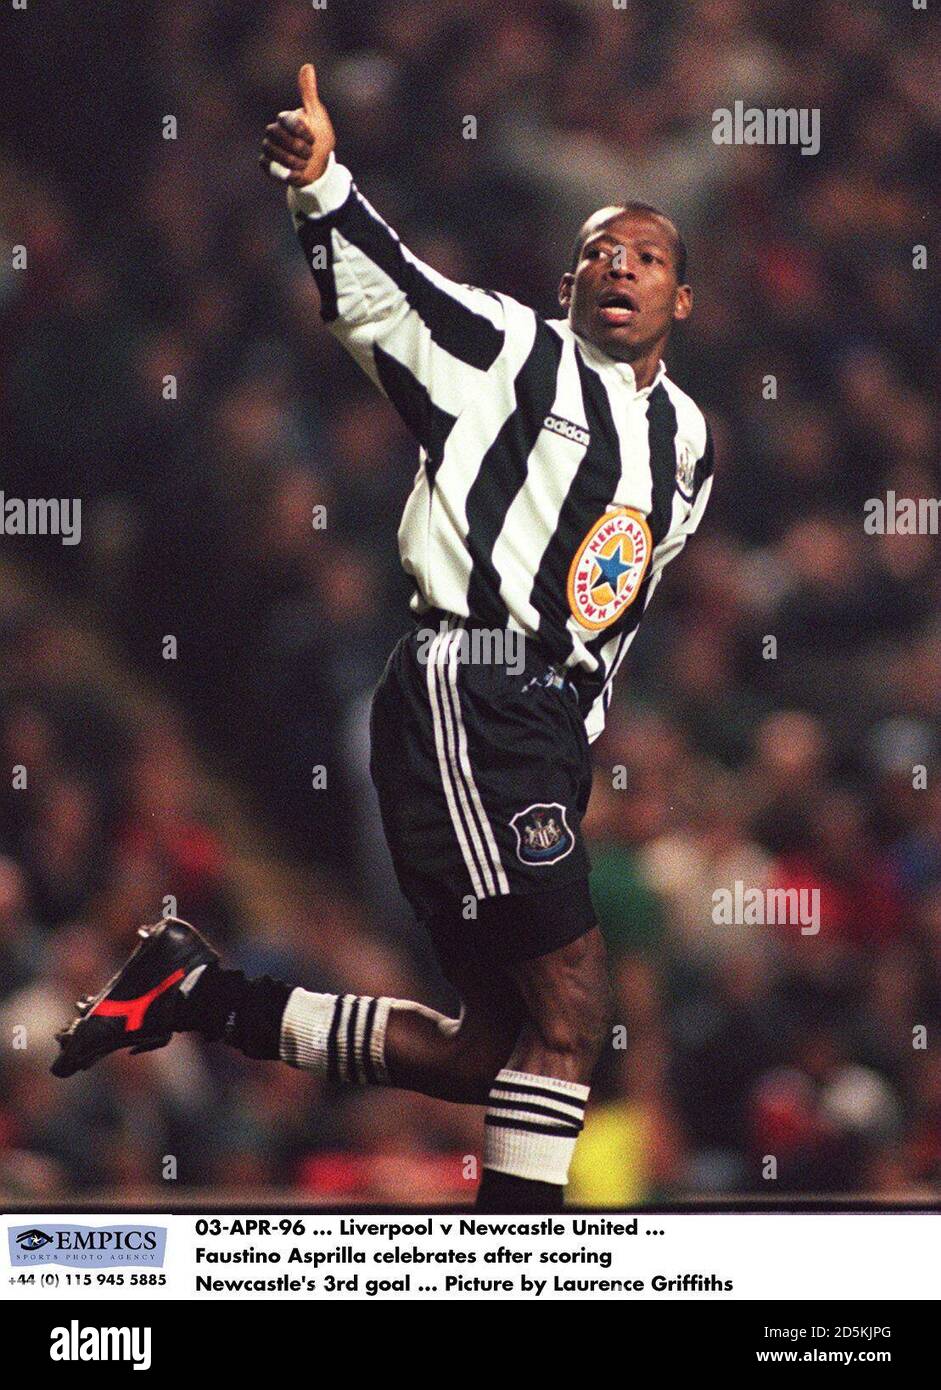 Faustino Asprilla celebrates after scoring Newcastle's 3rd goal against Liverpool Stock Photo